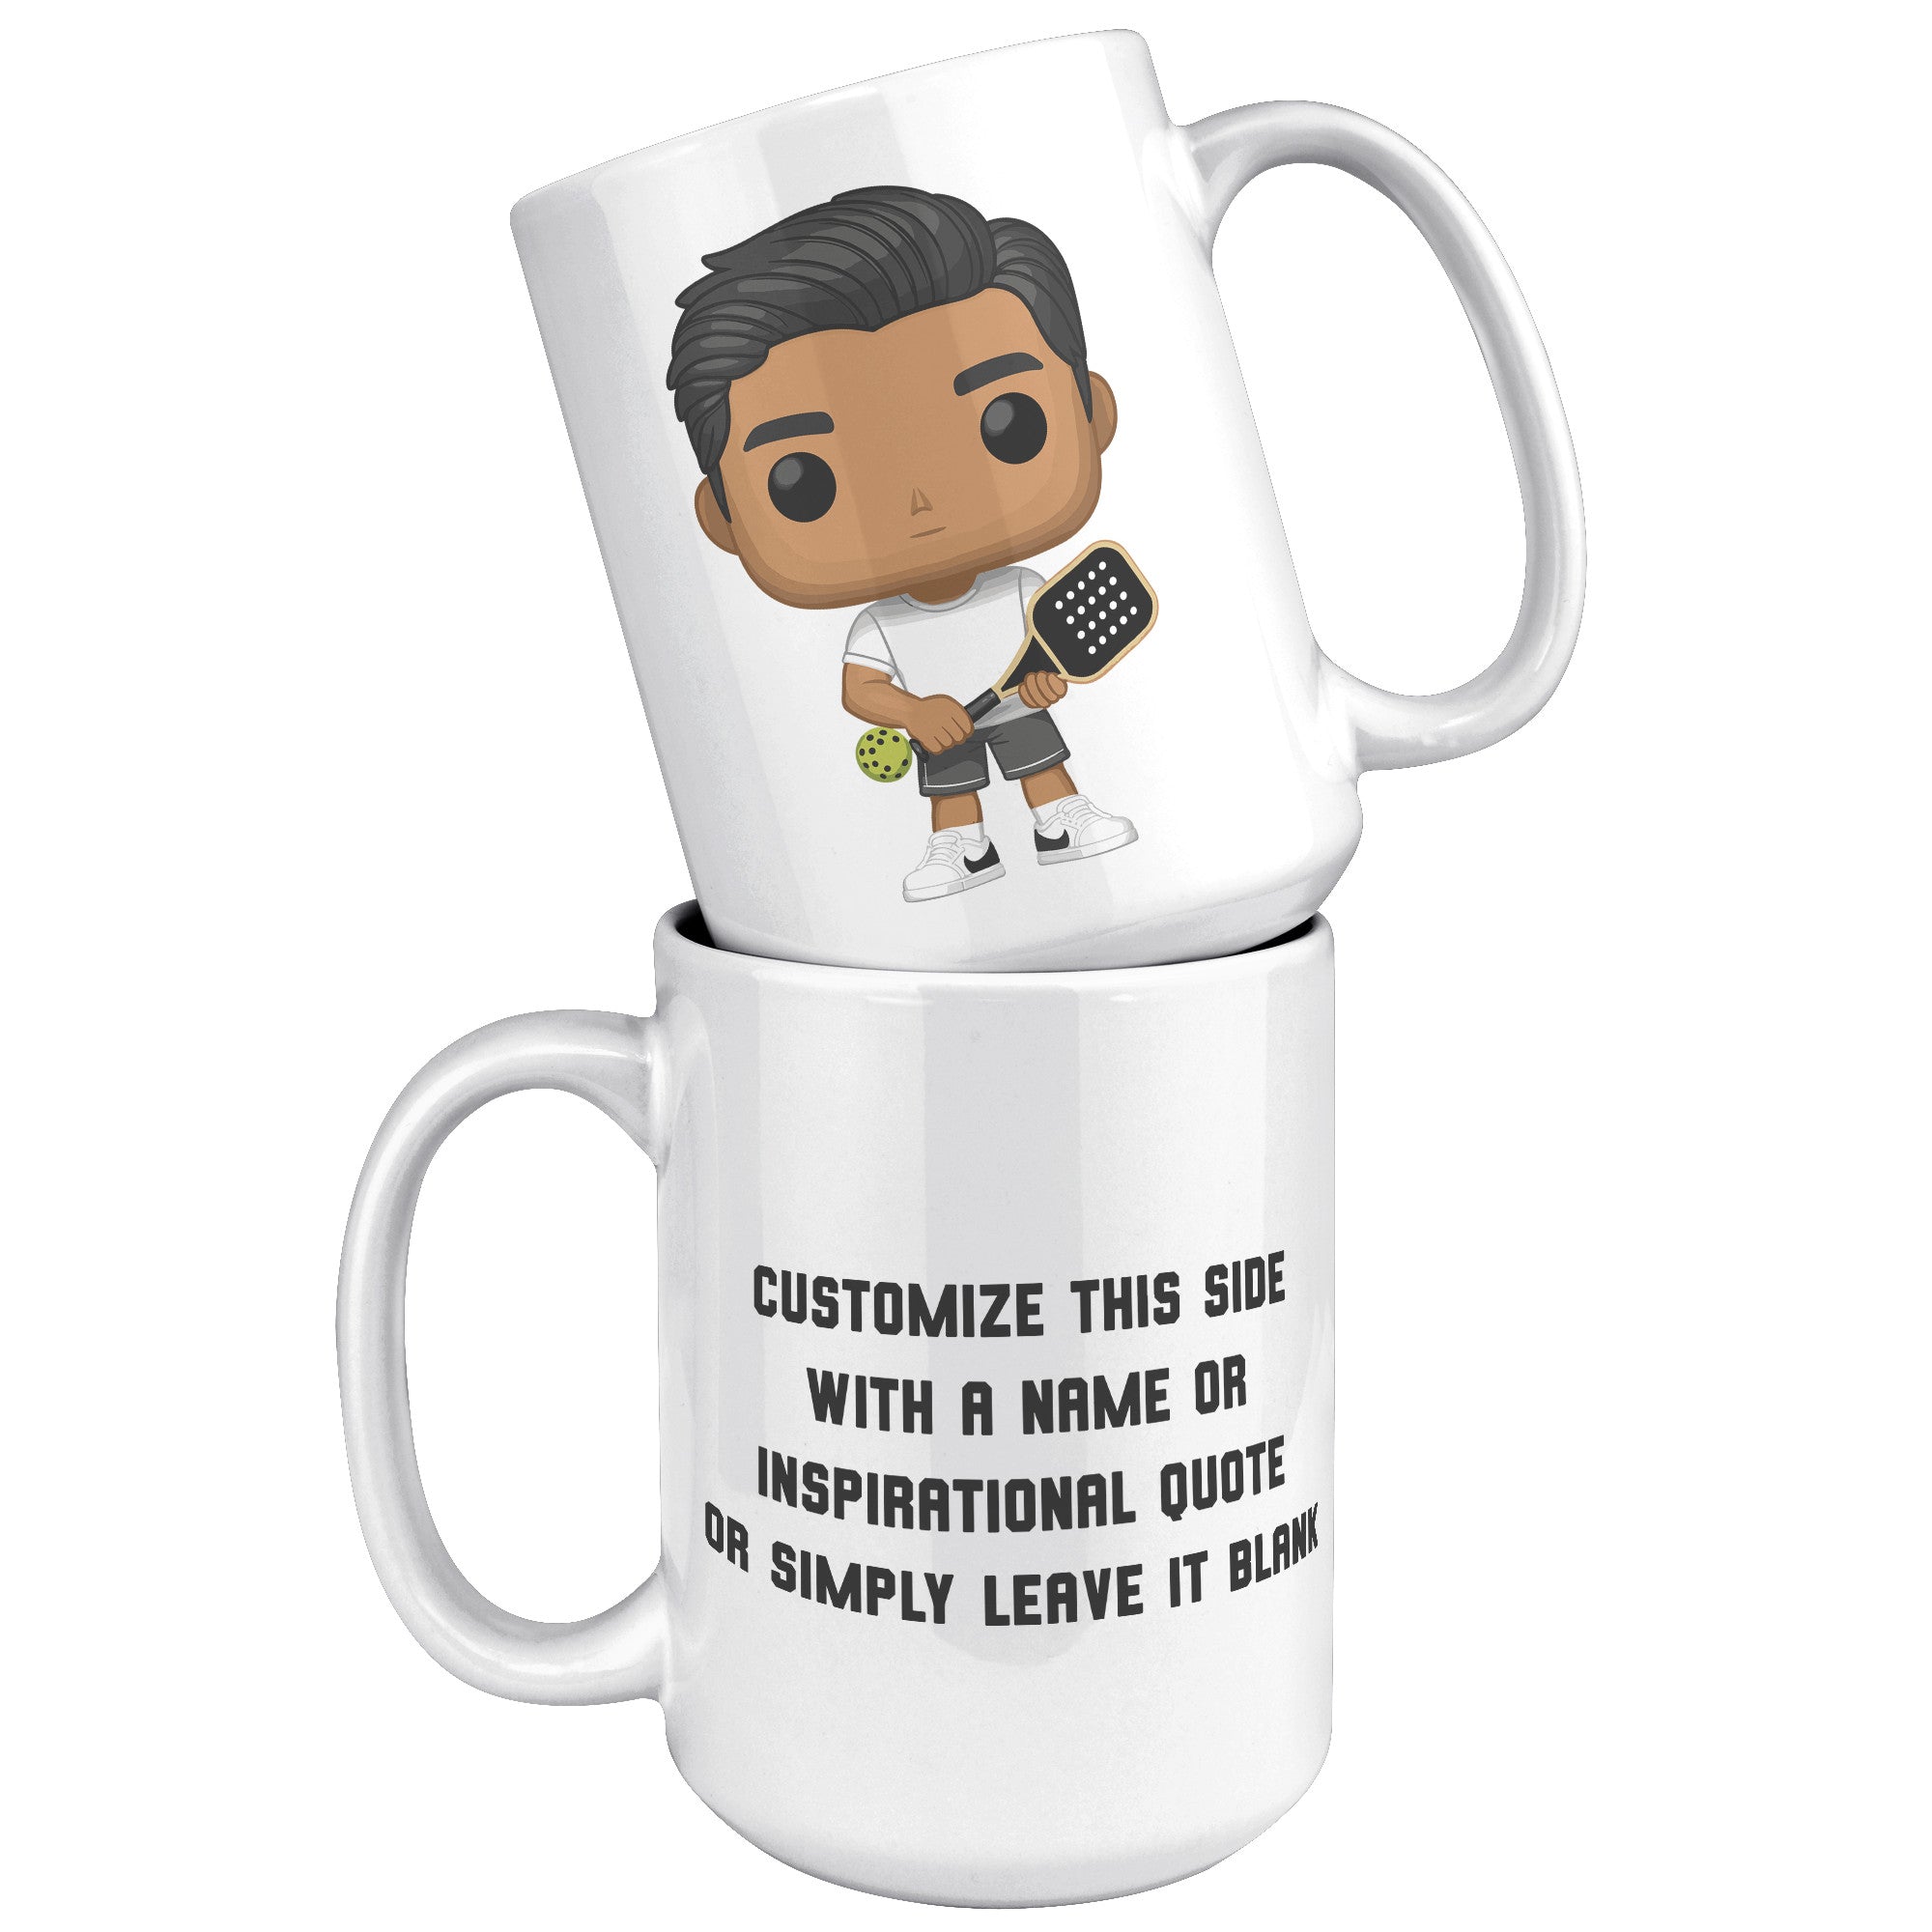 "Funko Pop Style Pickle Ball Player Boy Coffee Mug - Cute Athletic Cup - Perfect Gift for Pickle Ball Enthusiasts - Sporty Boy Apparel" - B1